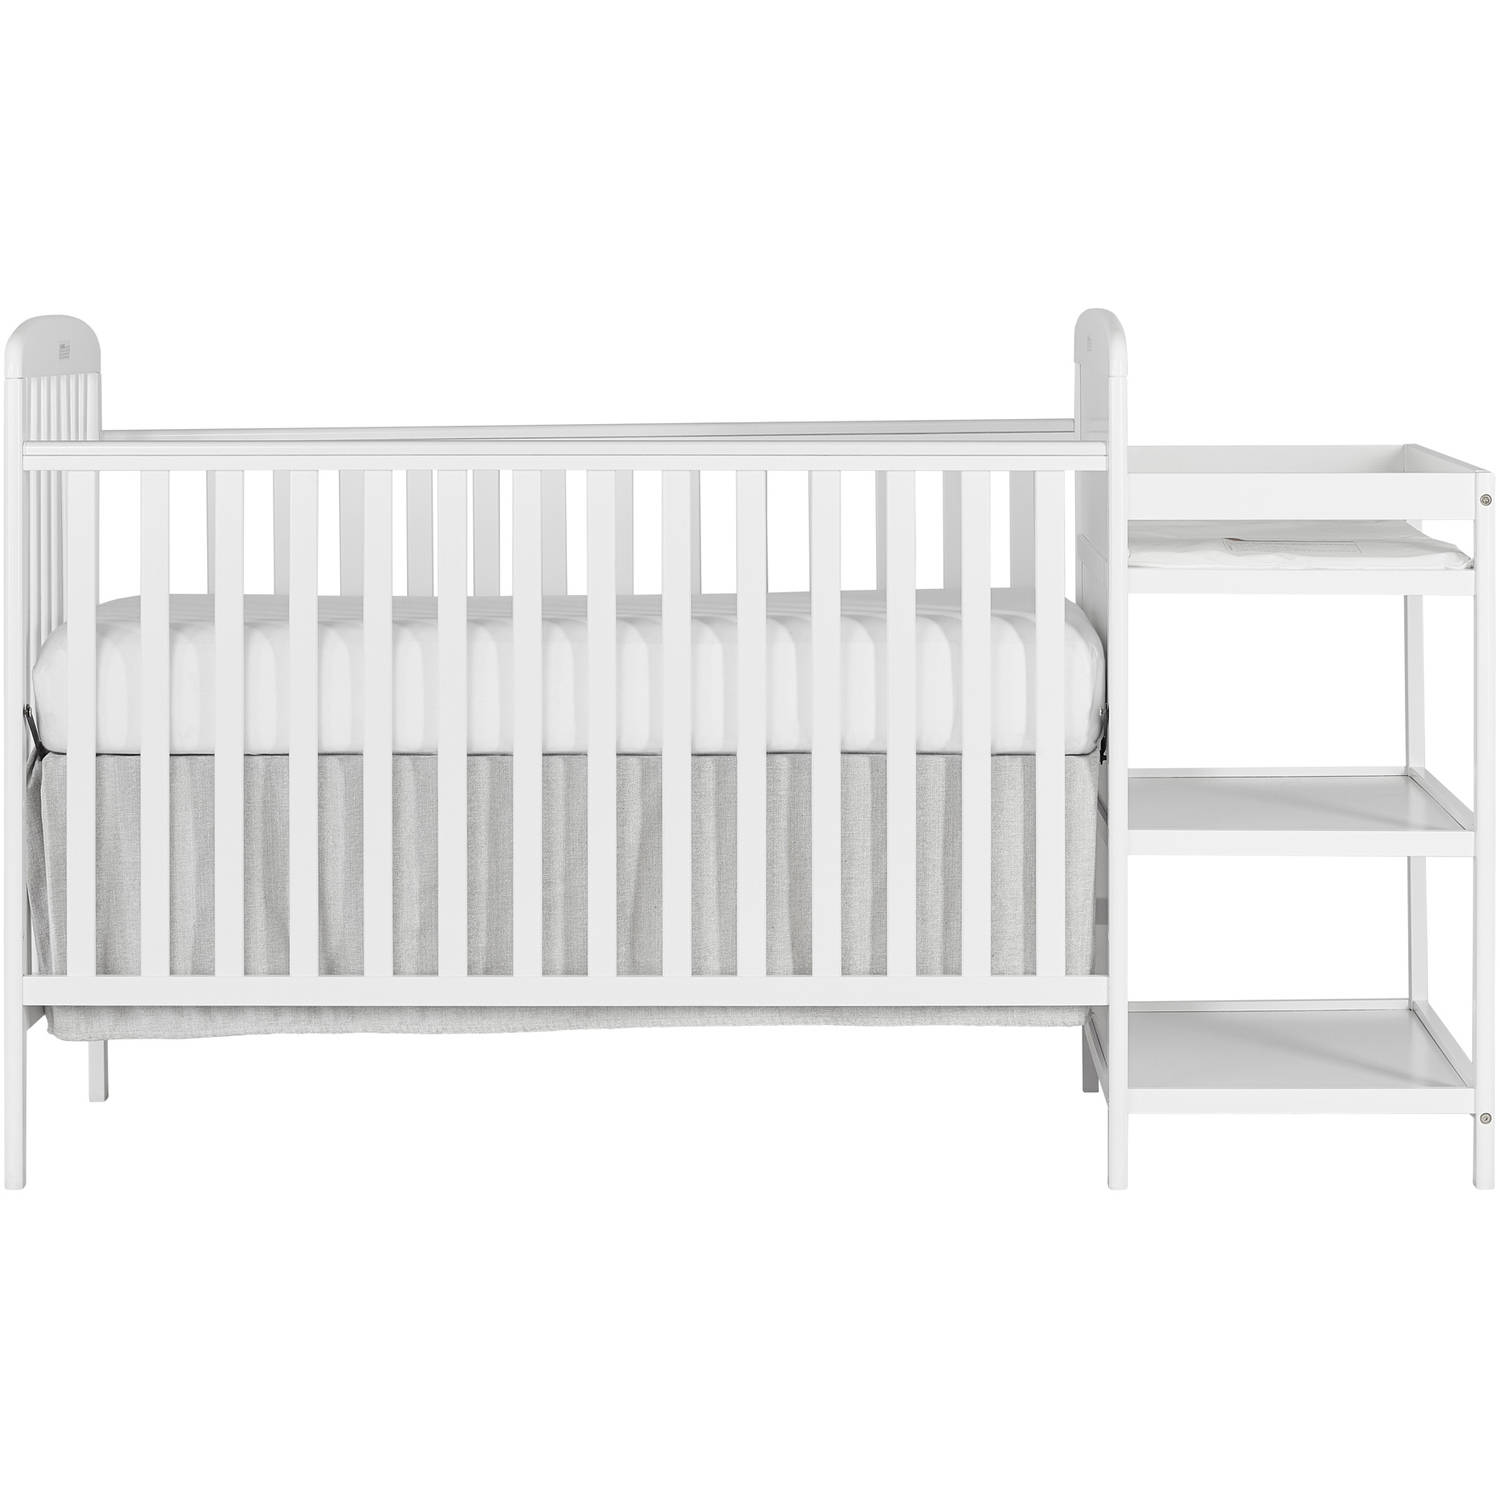 Dream On Me Anna 4-in-1 Full Size Crib and Changing Table, White - image 1 of 10